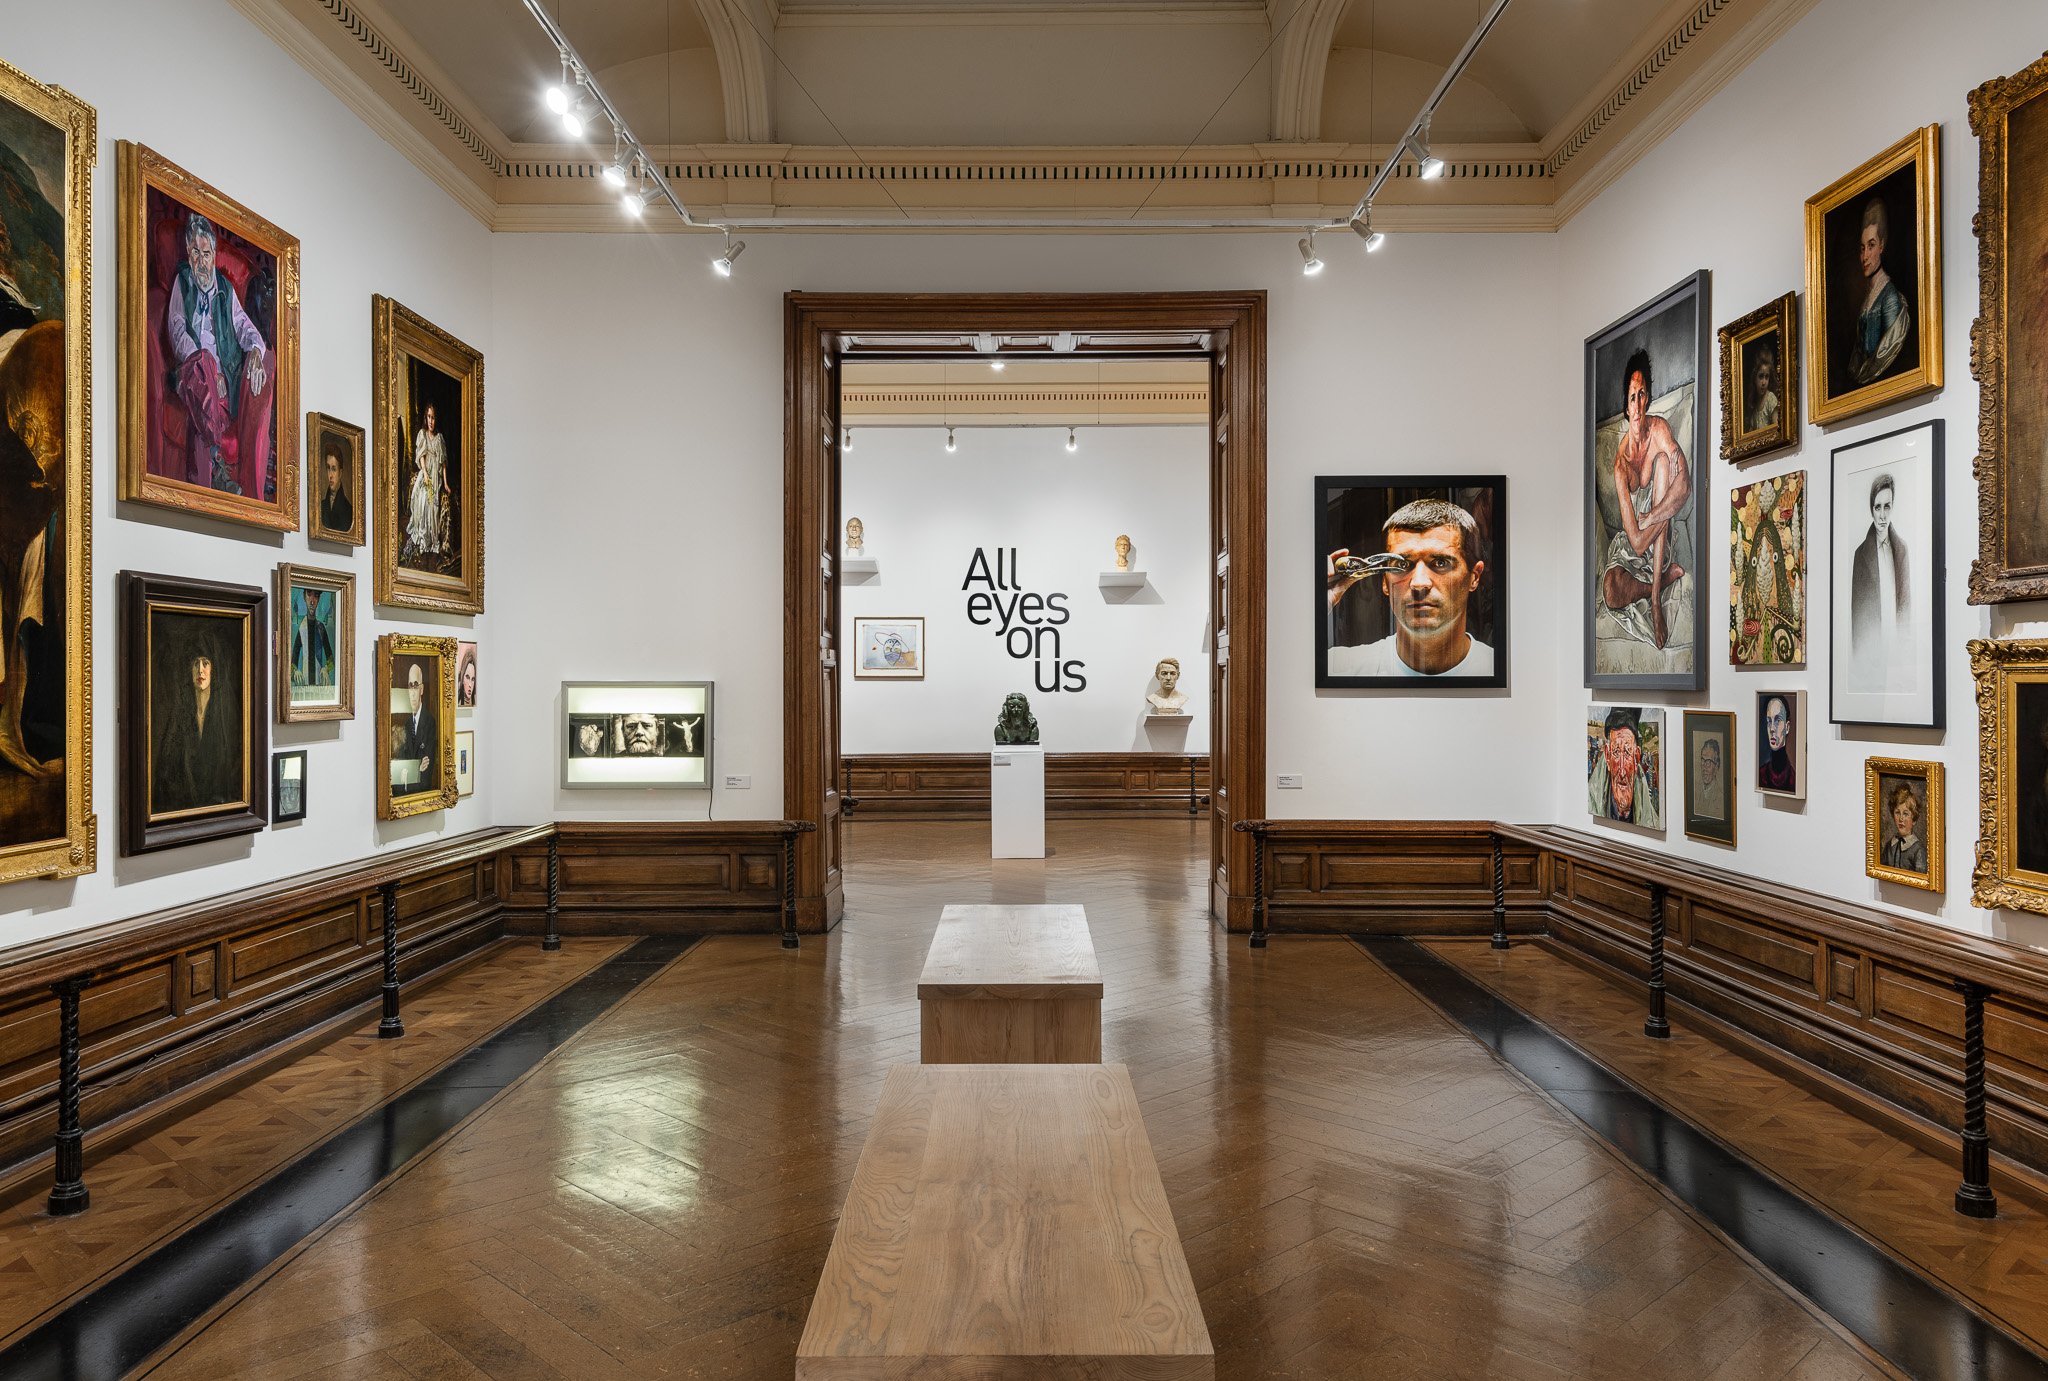 View of an art gallery with dark wooden floors, pale walls and various sizes of art hanging on the walls with view through doorway into another exhibition room.